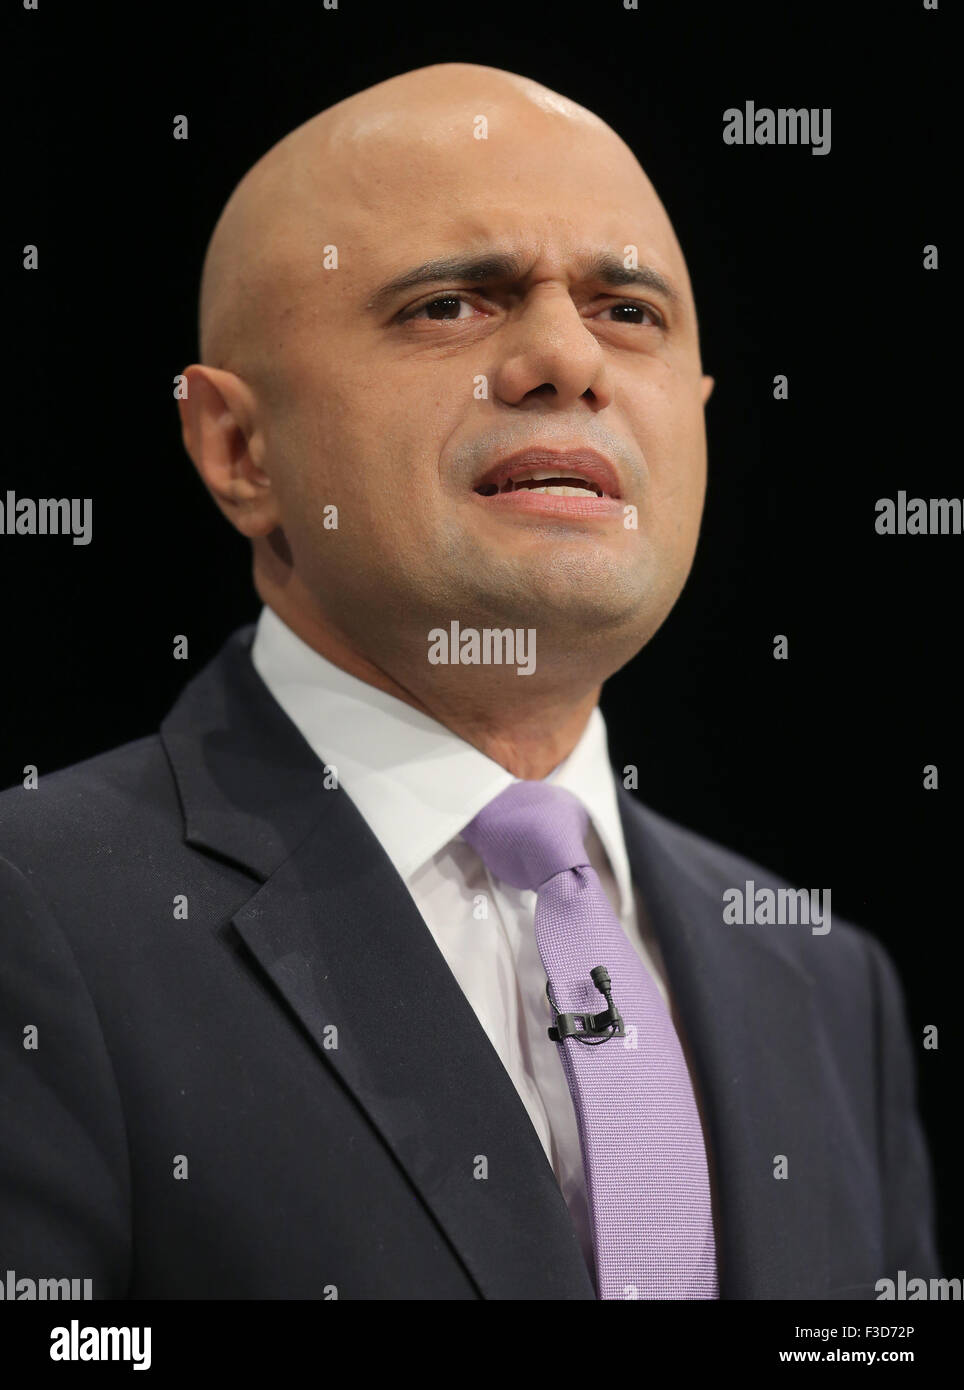 Sajid Javid Mp Secretary Of State For Business, Innovation And Skills Conservative Party Conference 2015 Manchester Central, Manchester, England 05 October 2015 Addresses The Conservative Party Conference 2015 At Manchester Central, Manchester Credit:  Allstar Picture Library/Alamy Live News Stock Photo